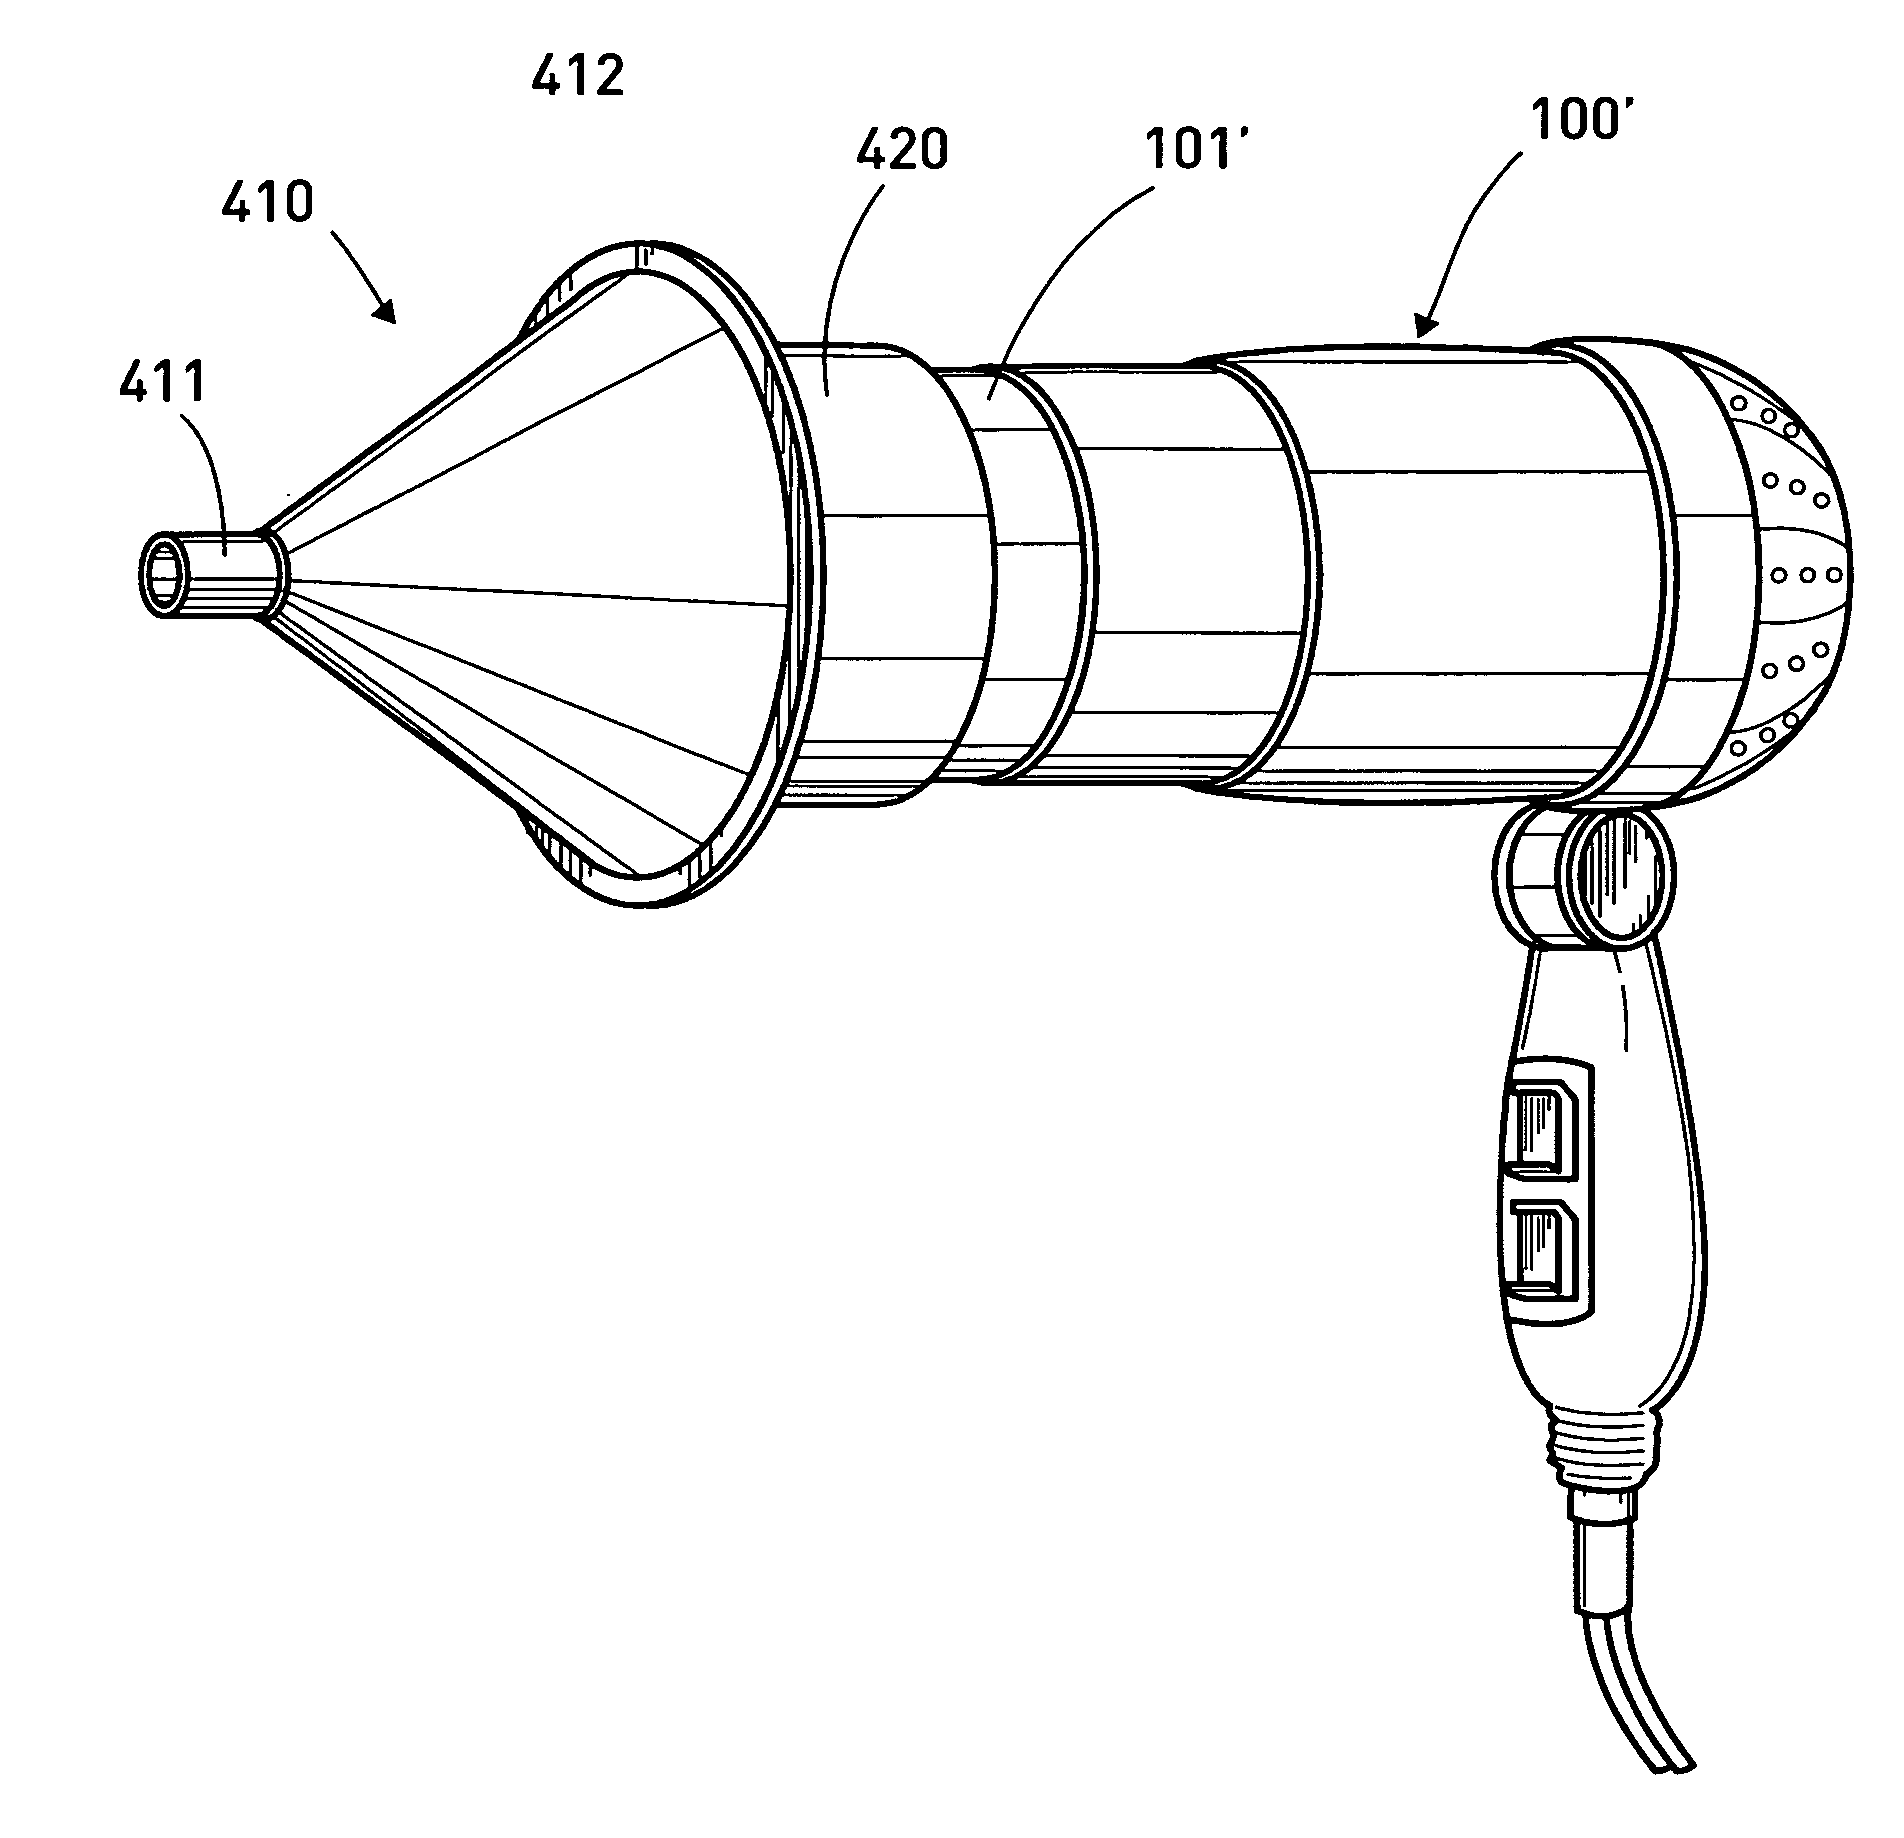 Device, method and system for treatment of sinusitis